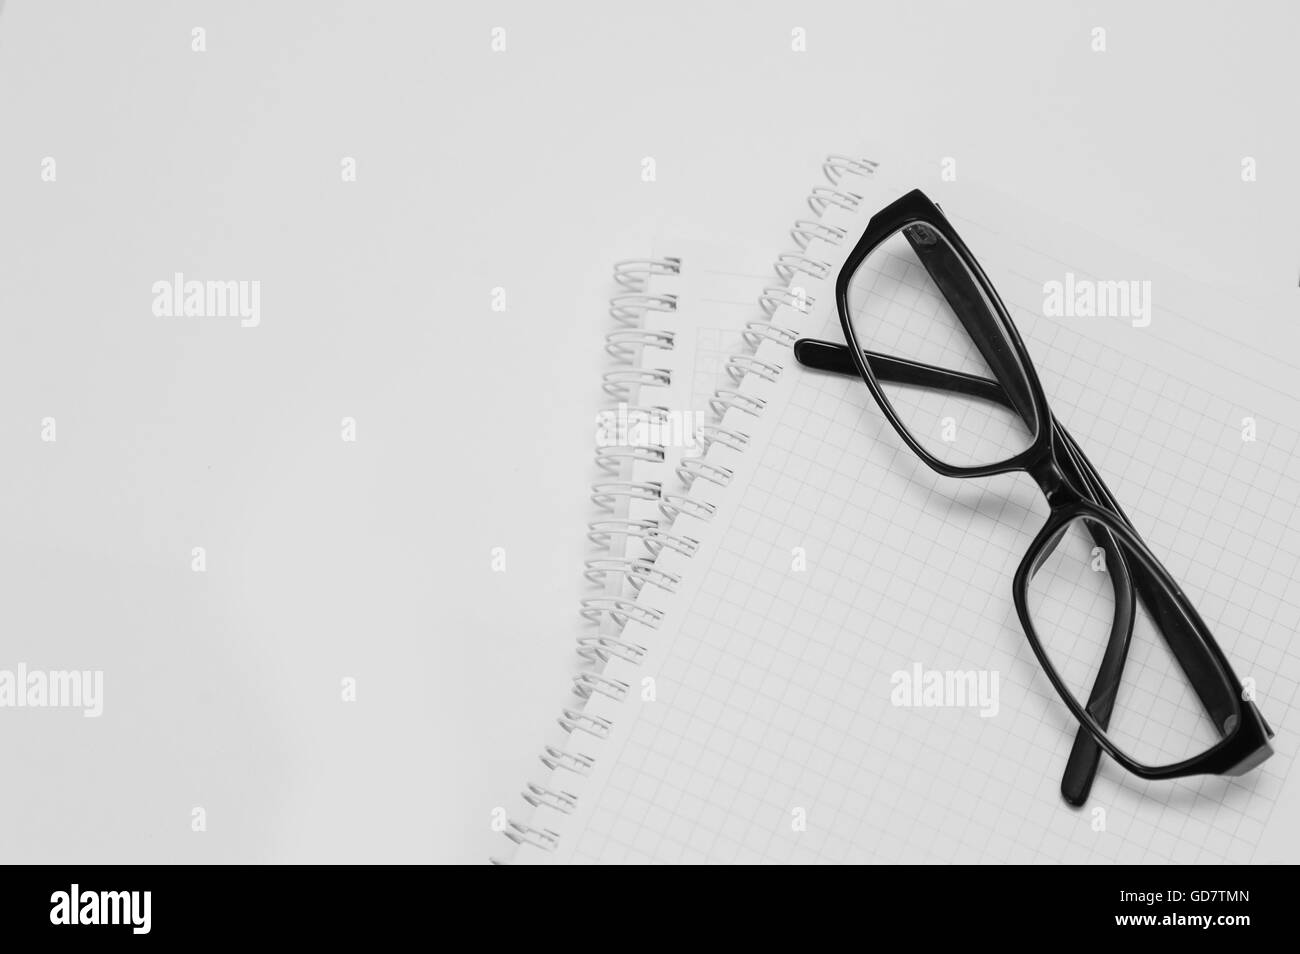 black plastic glasses on the opened notepad Stock Photo